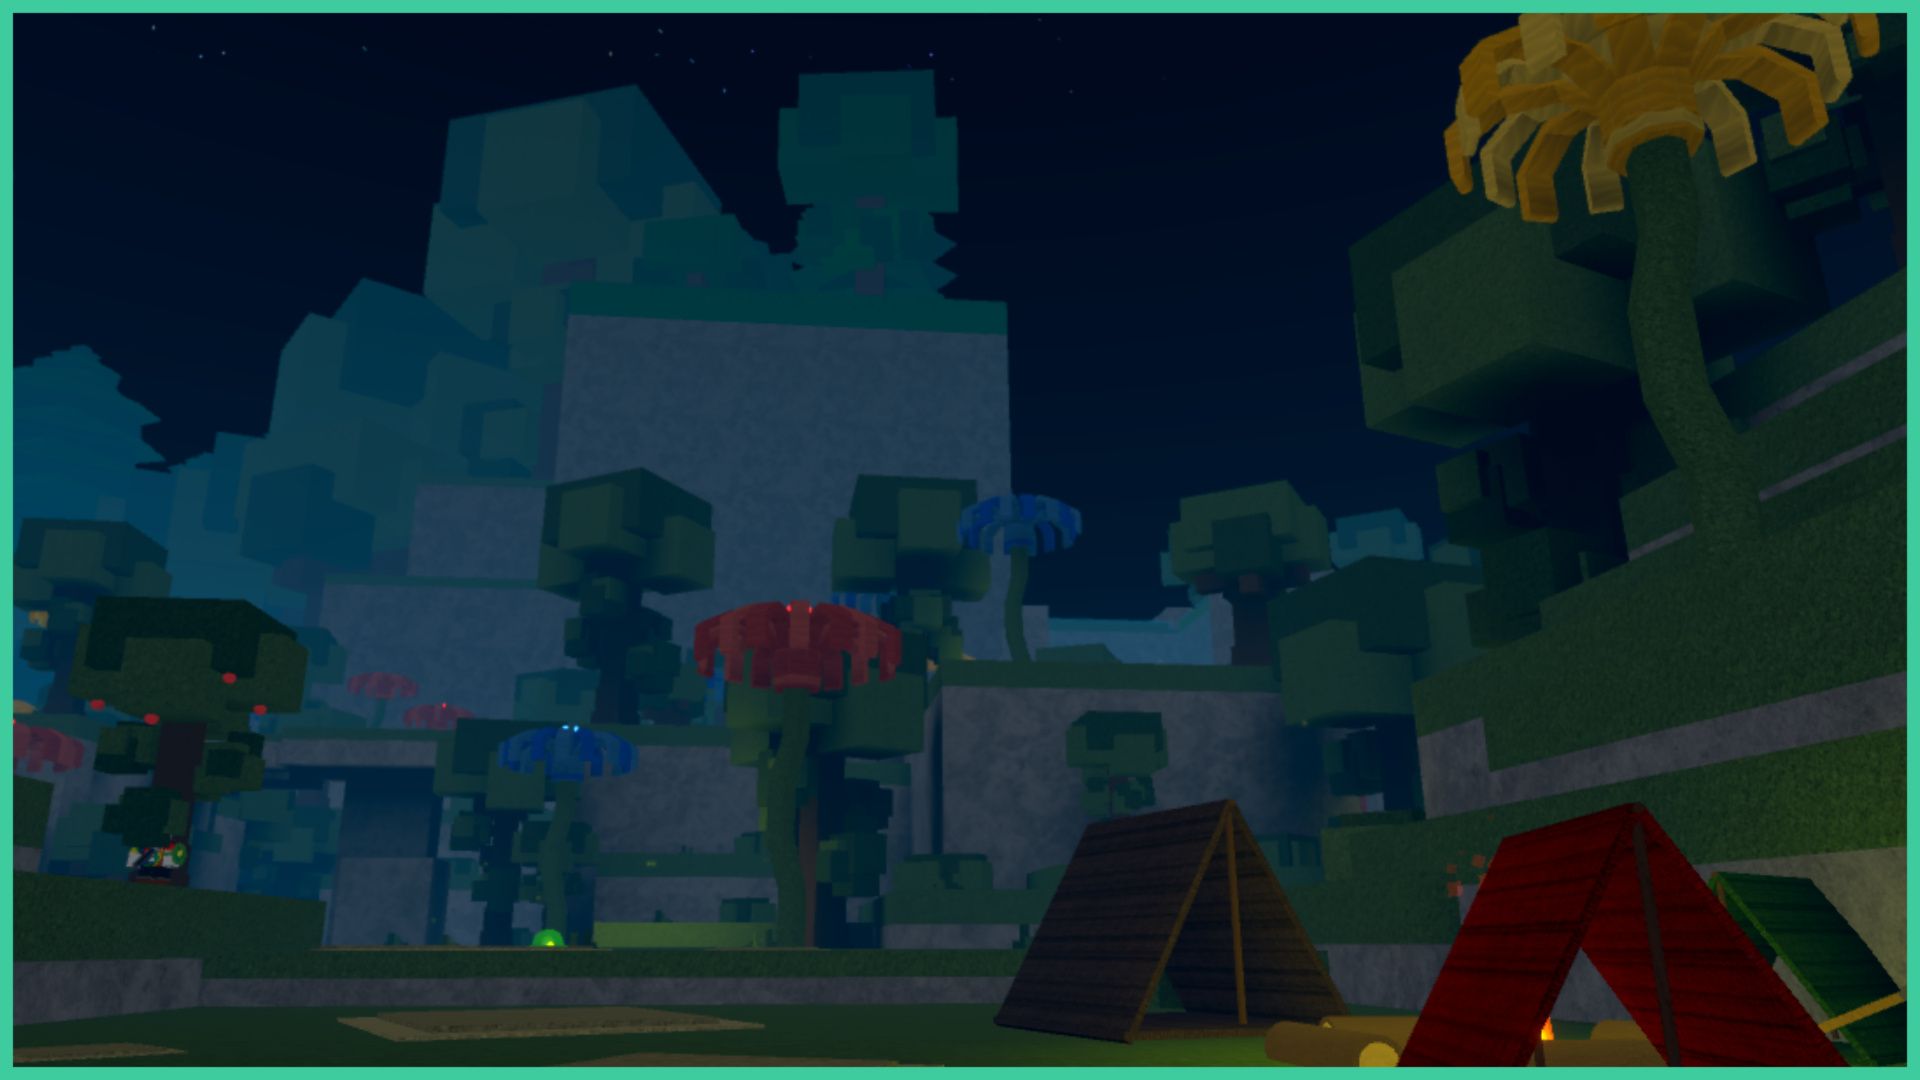 feature image for our critical revengeance classes guide, the image is a screenshot of a campsite in the forest with giant flowers towering over the hills and a glowing slime mob in the distance, with cliffs in the distance and stars sparkling in the sky